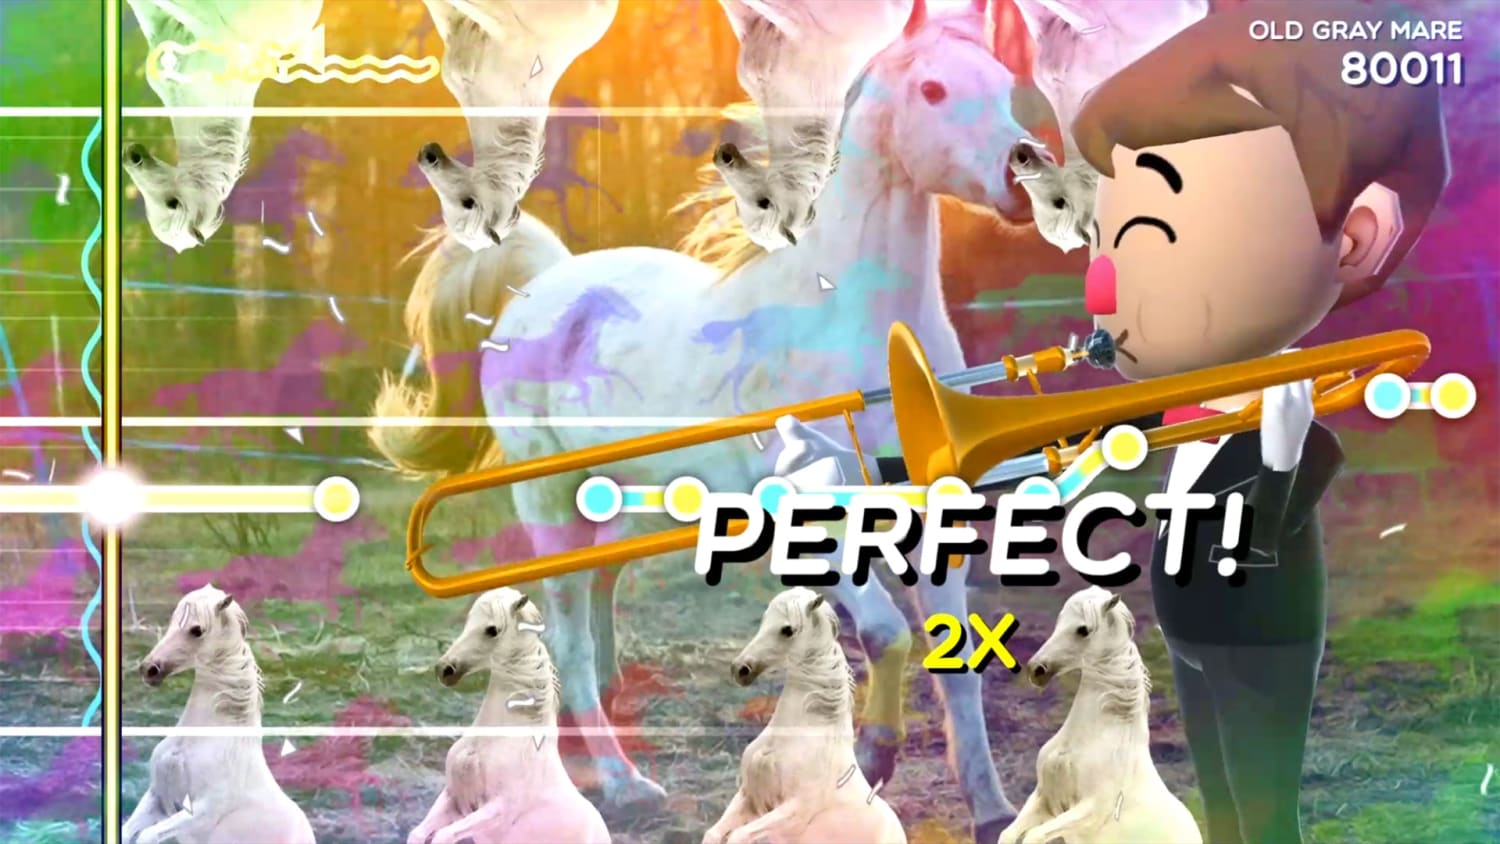 Trombone-Champ-is-the-internet's-new-favorite-video-game.-The-developer-never-expected-the-toots-to-go-viral.